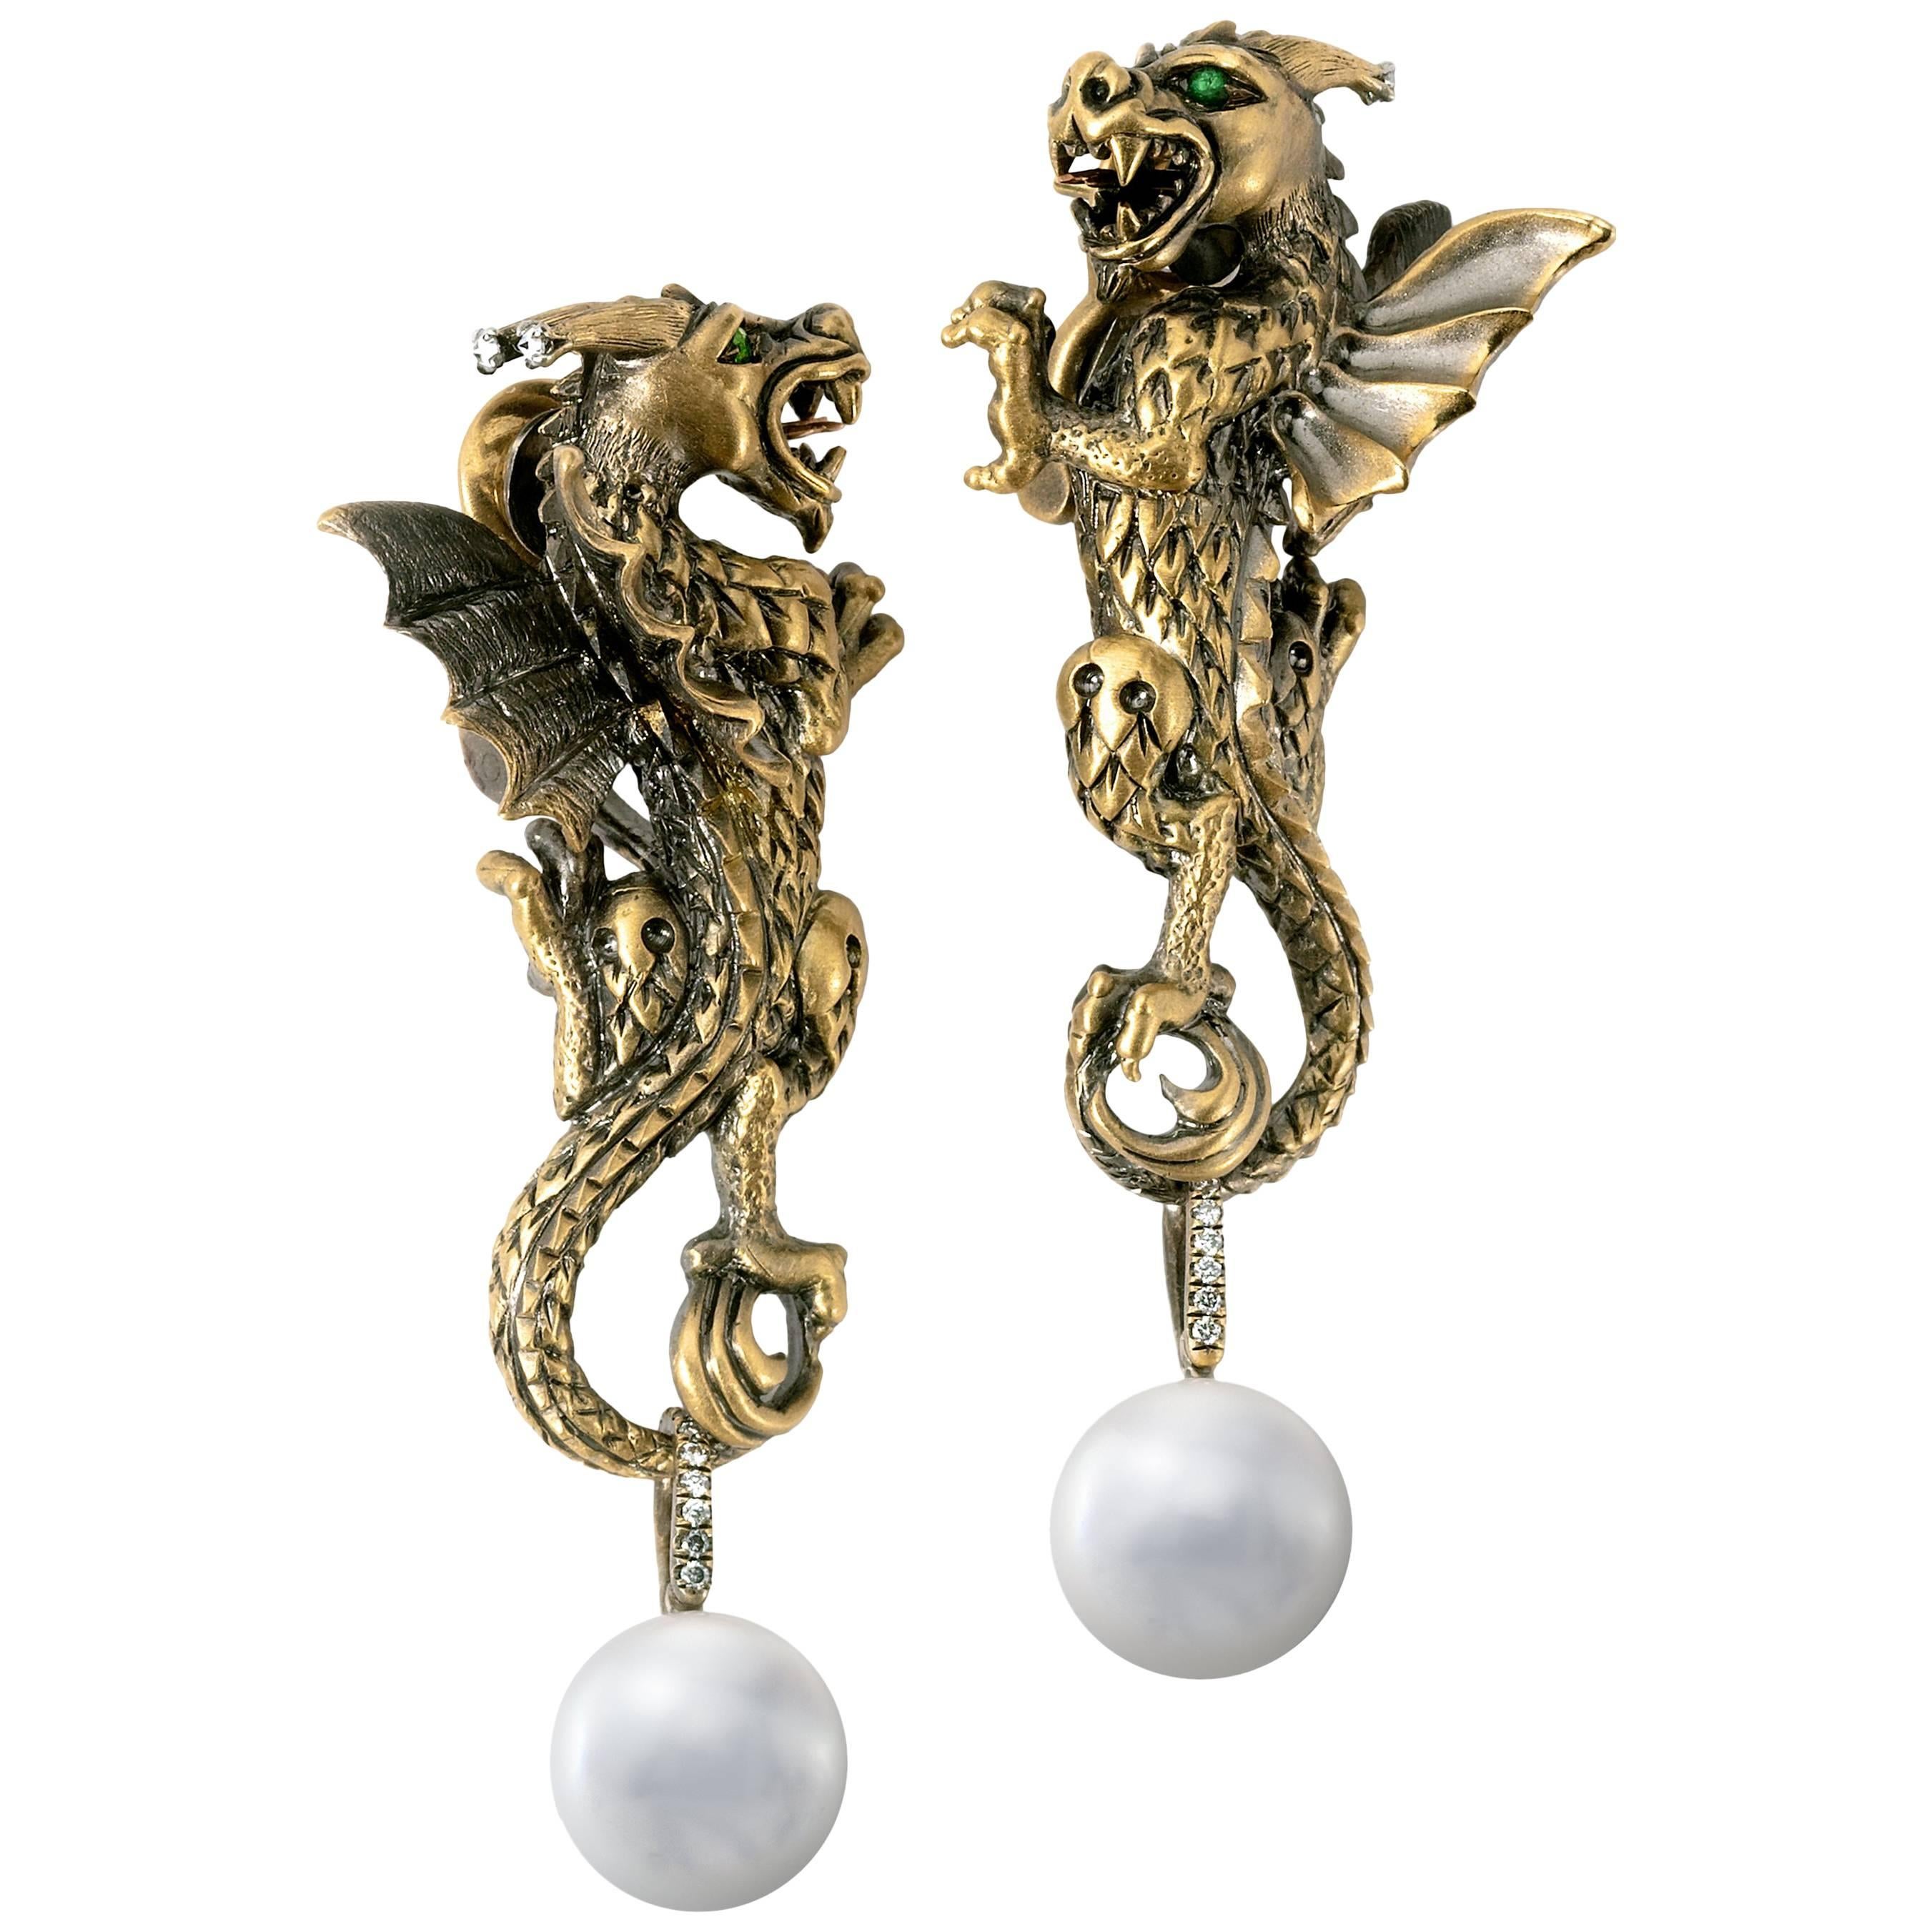 Wendy Brandes Yellow Gold Dragon Earrings With Pearls, Diamonds, and Tsavorites